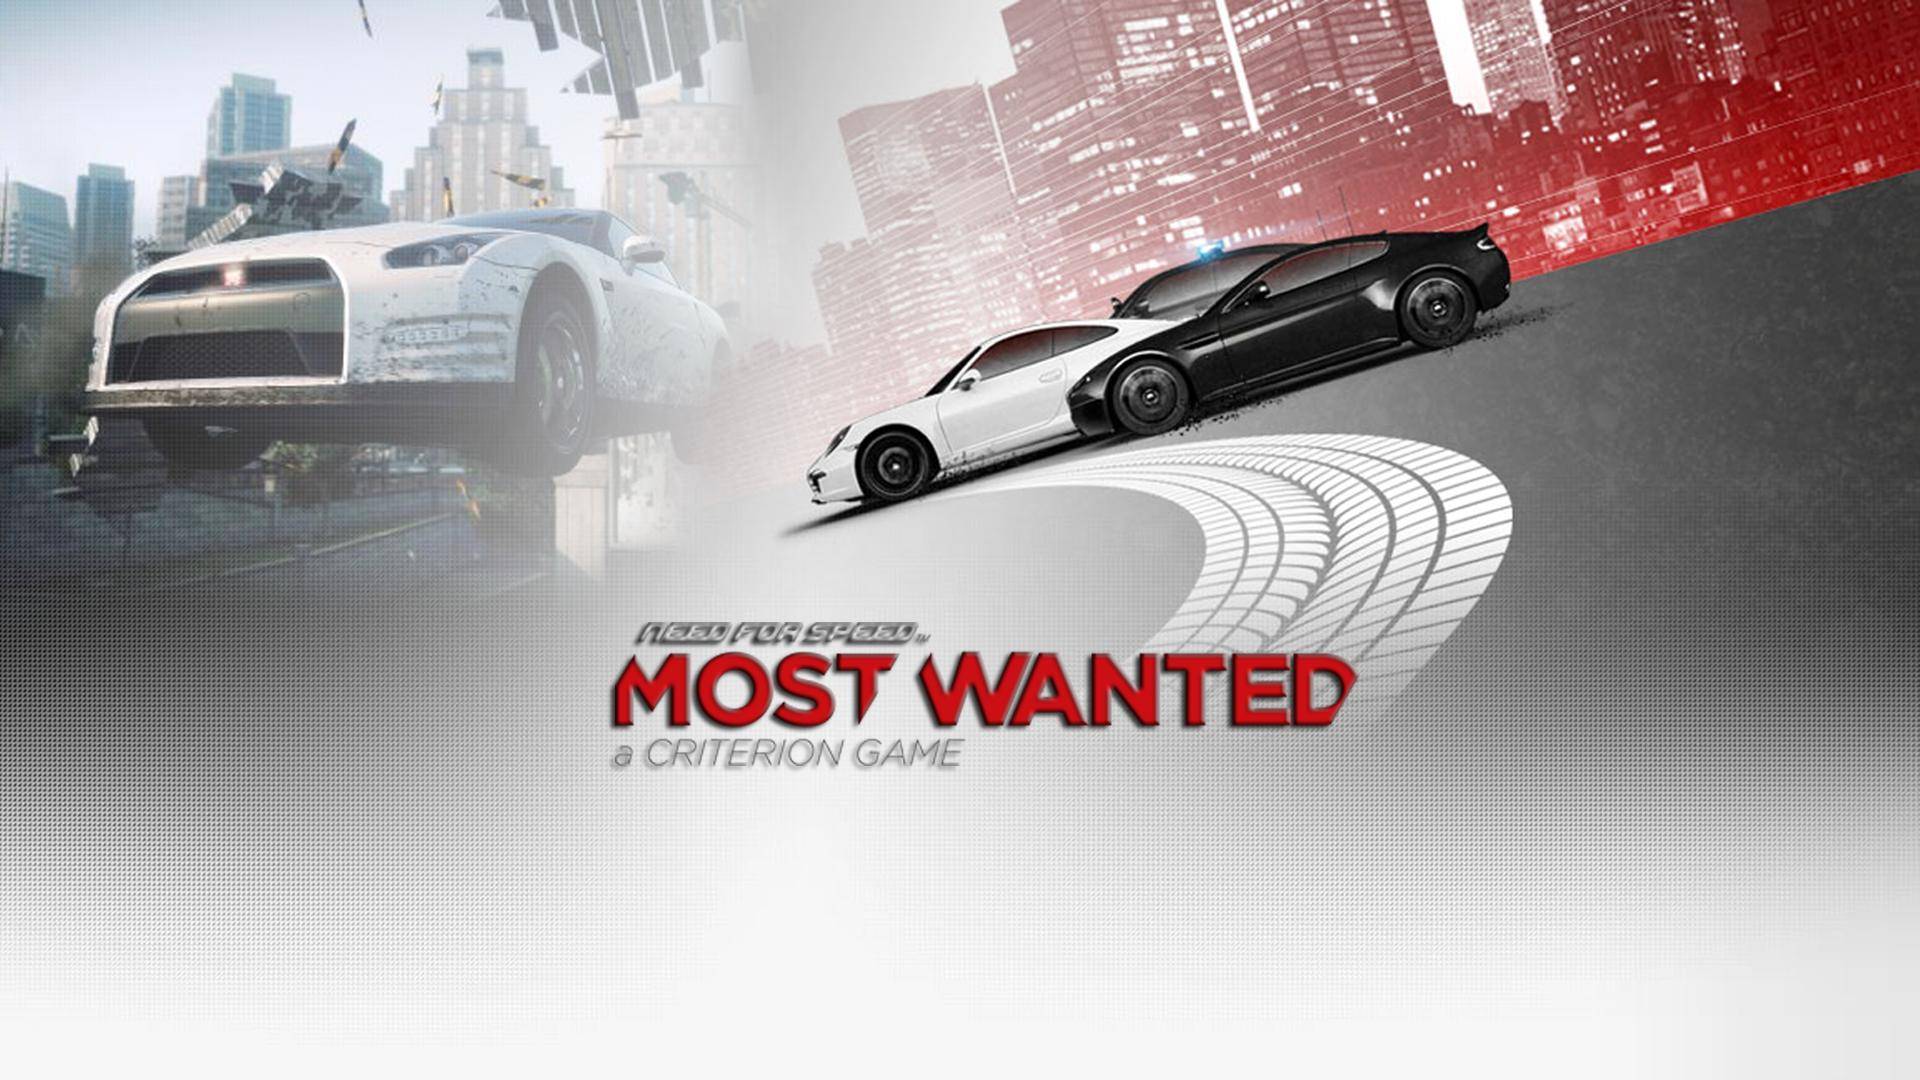 Need For Speed Most Wanted 2012 Wallpaper In HD « Video Game News